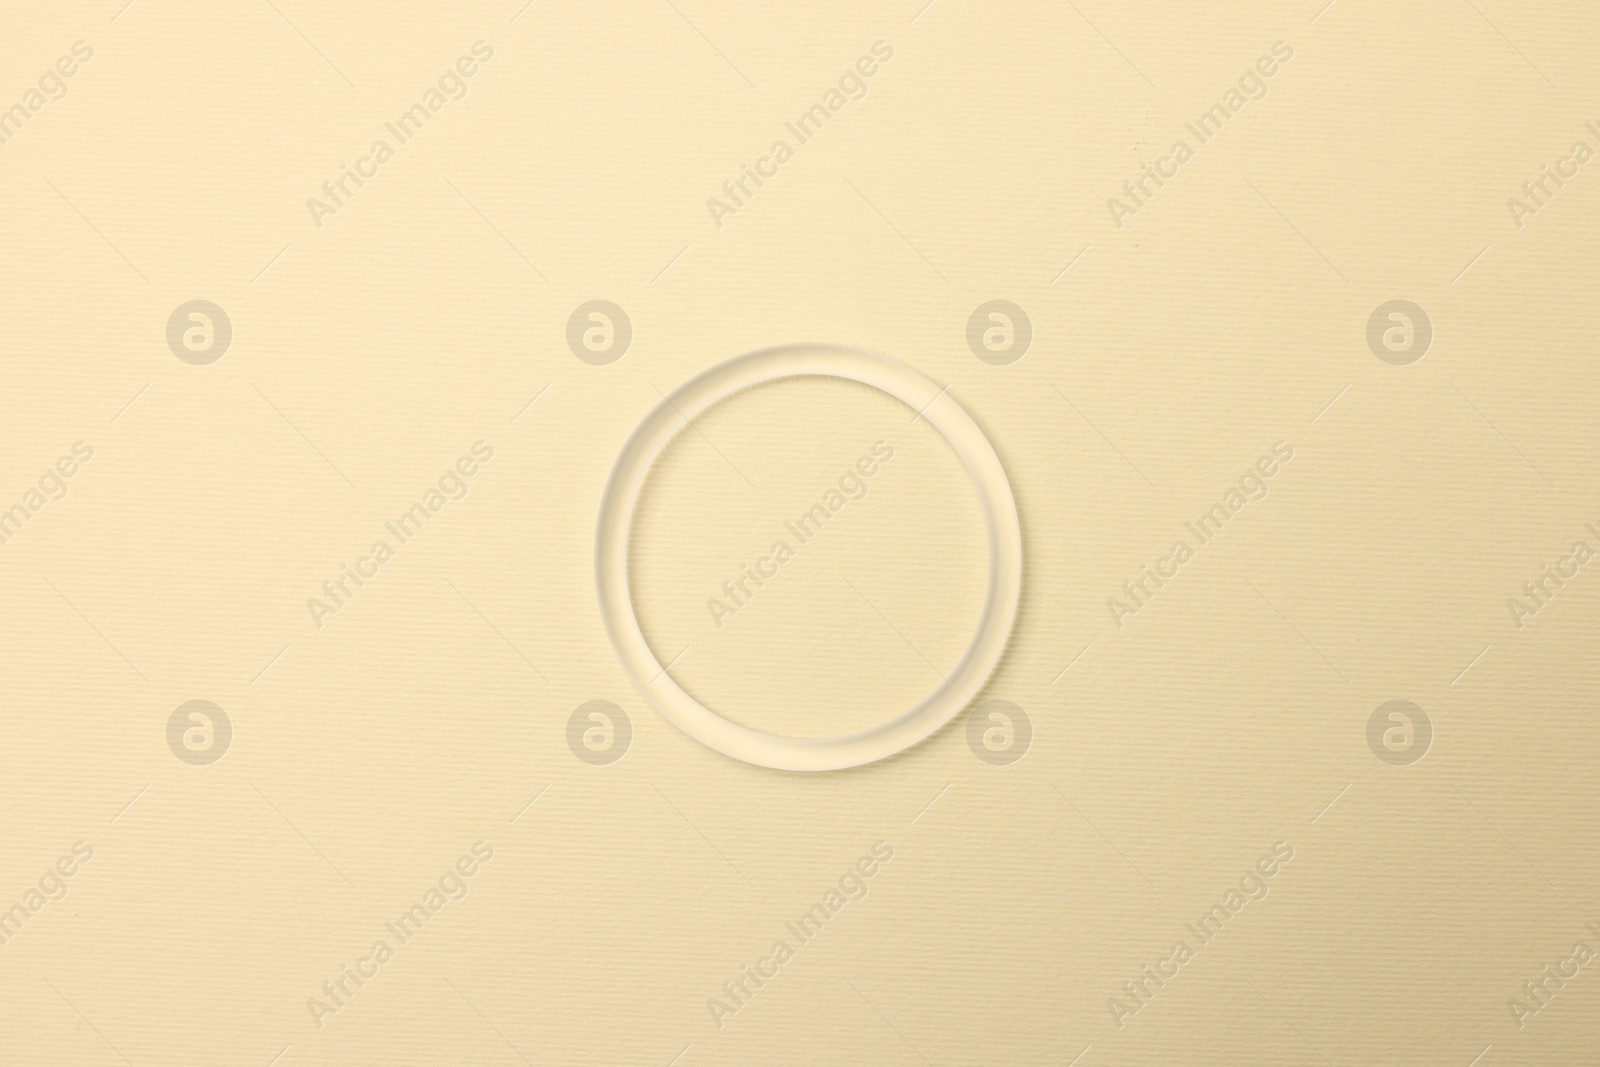 Photo of Diaphragm vaginal contraceptive ring on light yellow background, top view